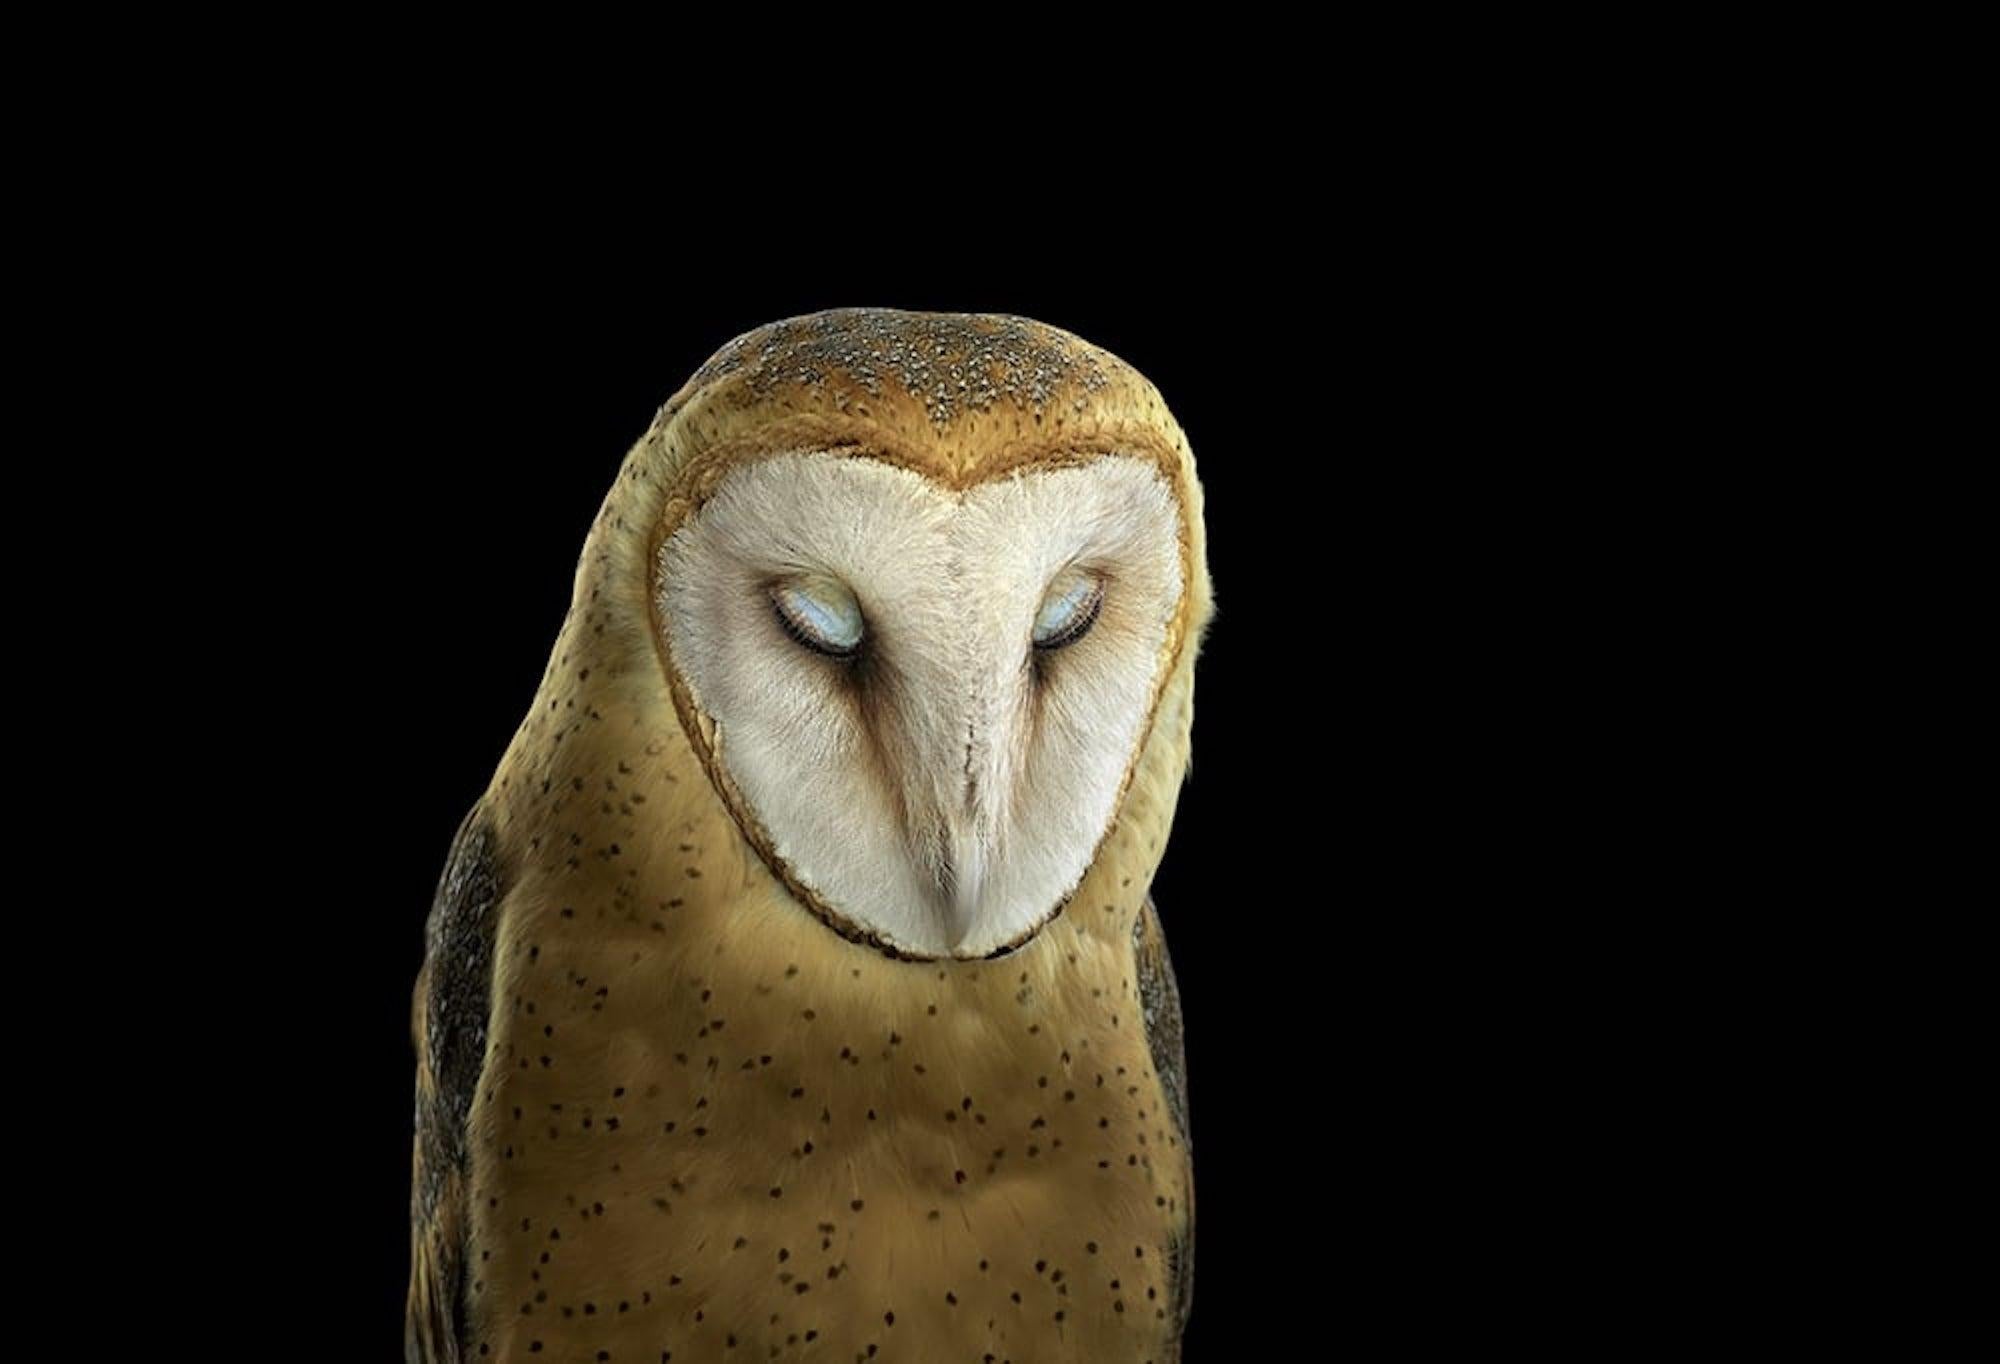 'Barn Owl #3, St Louis, MO, 2012' is a limited-edition photograph by contemporary artist Brad Wilson from the ‘Affinity’ series which features studio portraits of wild animals. 

This photograph is sold unframed as a print only. It is available in 4